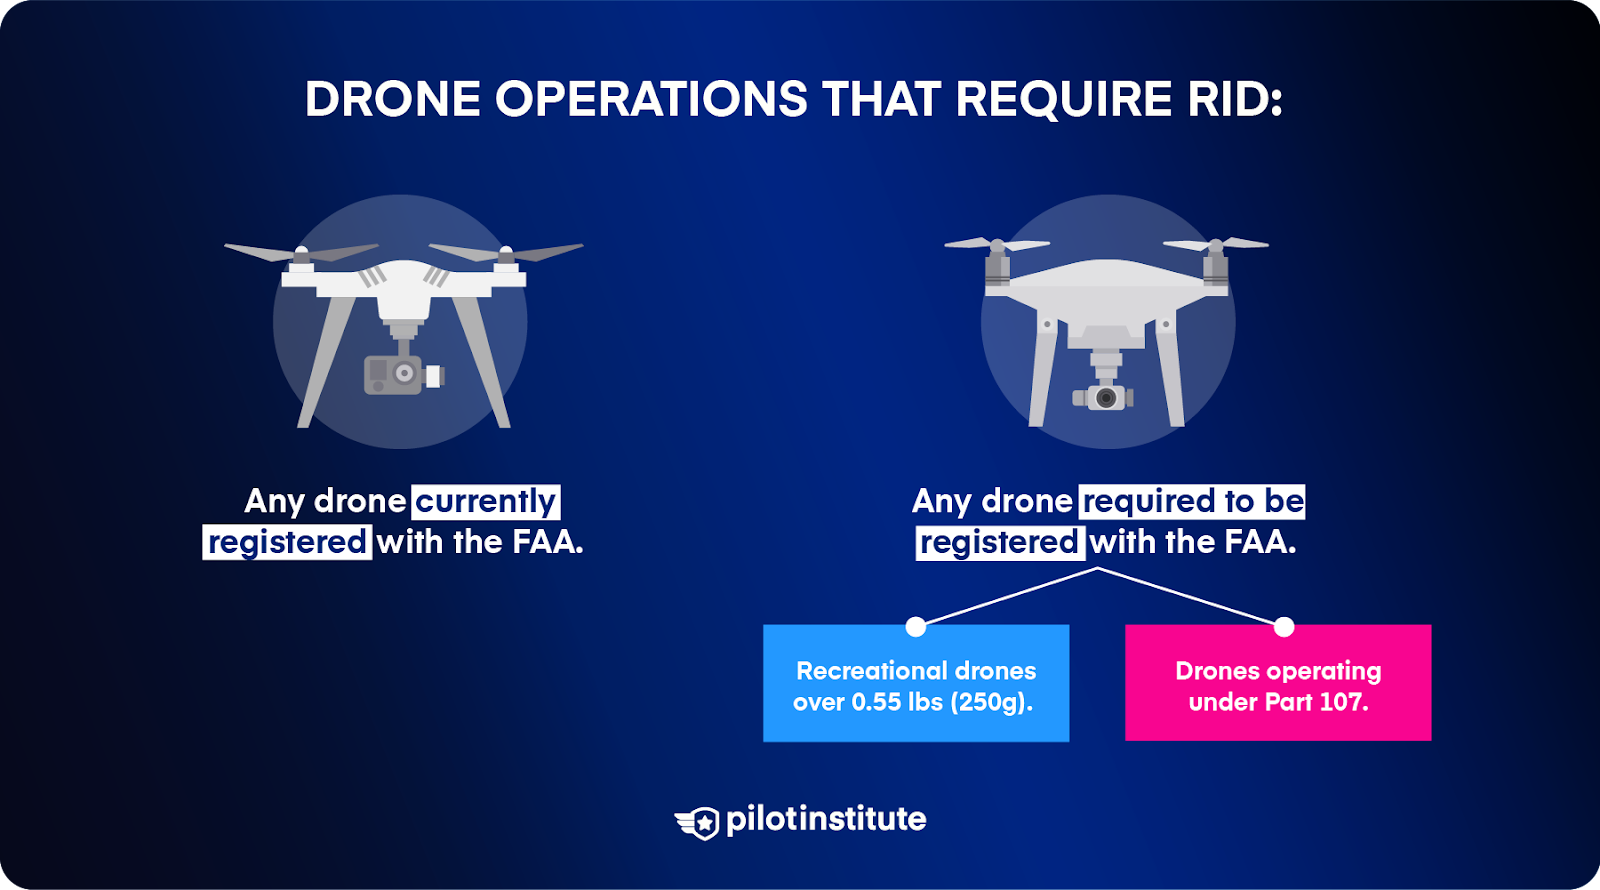 Infographic showing which drones require Remote ID.